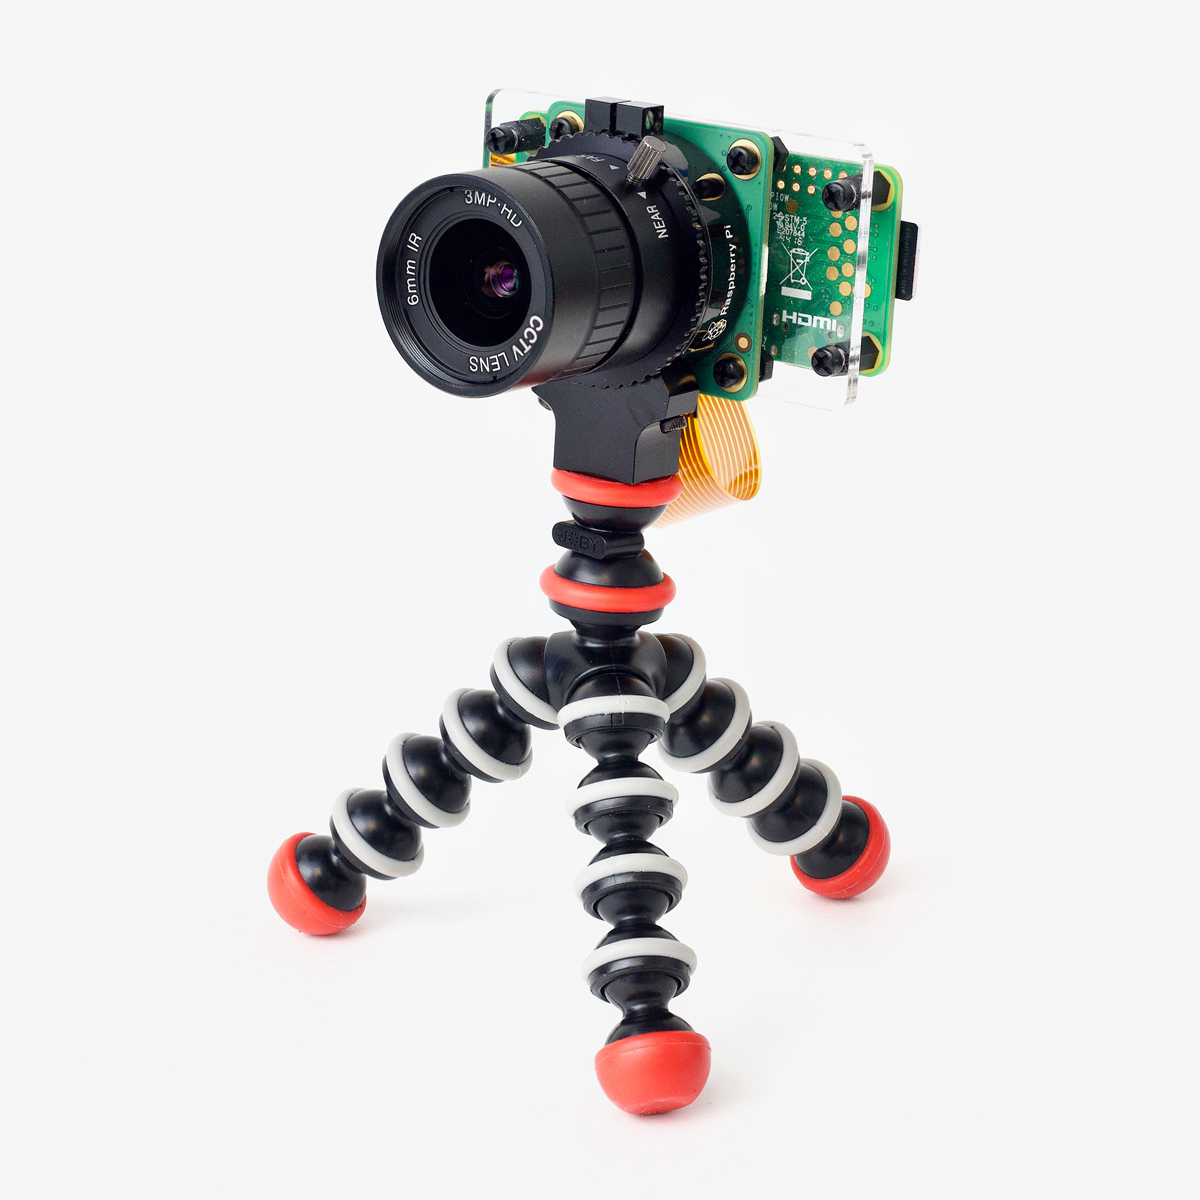 Raspberry Pi Zero W with HQ Camera and wide-angle lens on Tripod